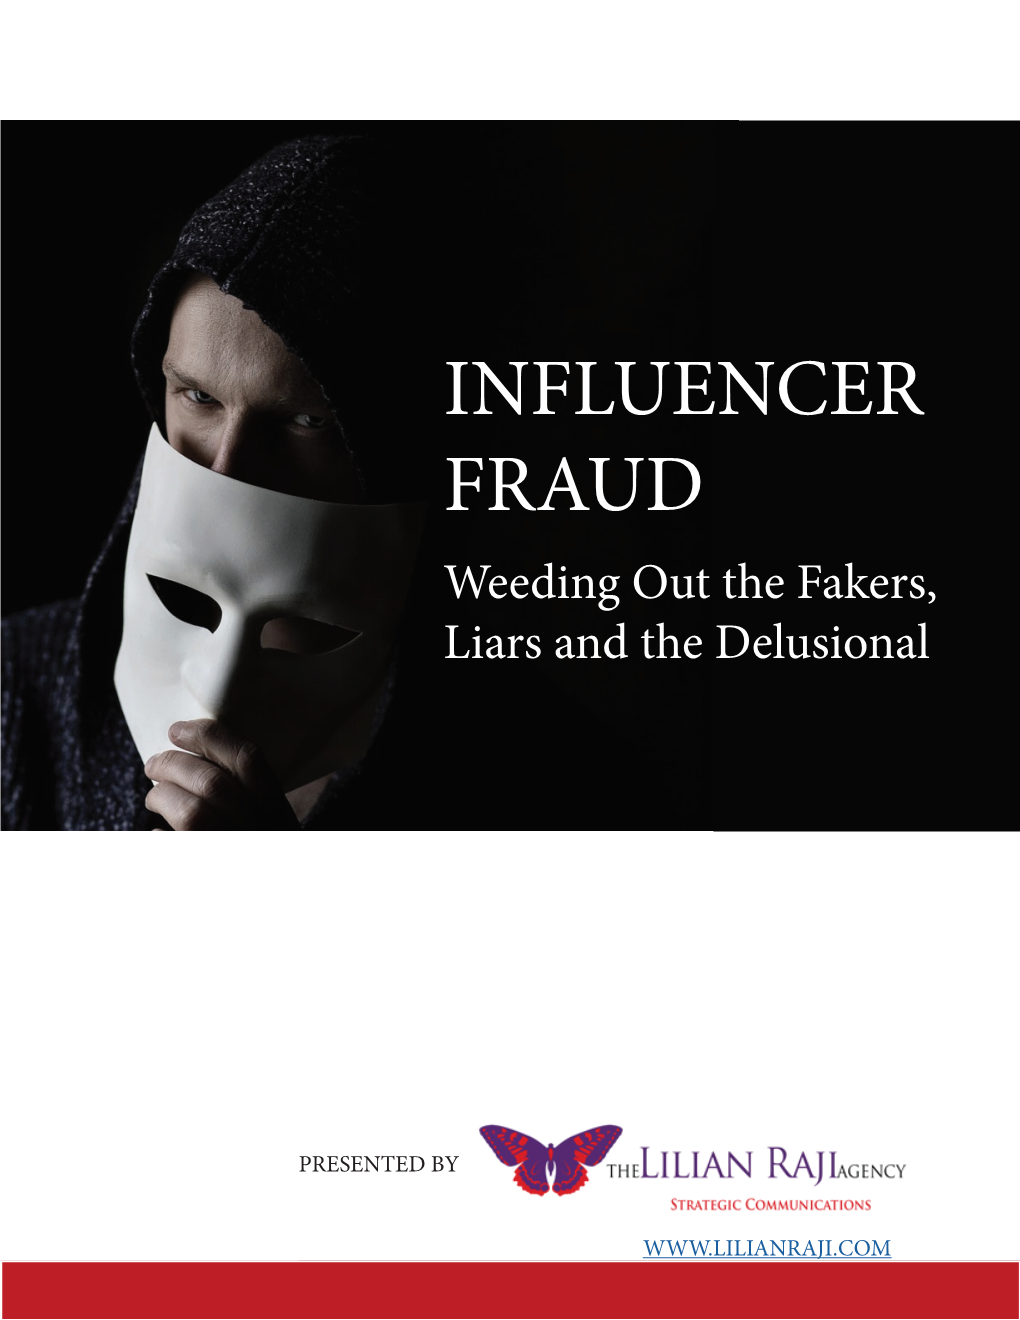 INFLUENCER FRAUD Weeding out the Fakers, Liars and the Delusional